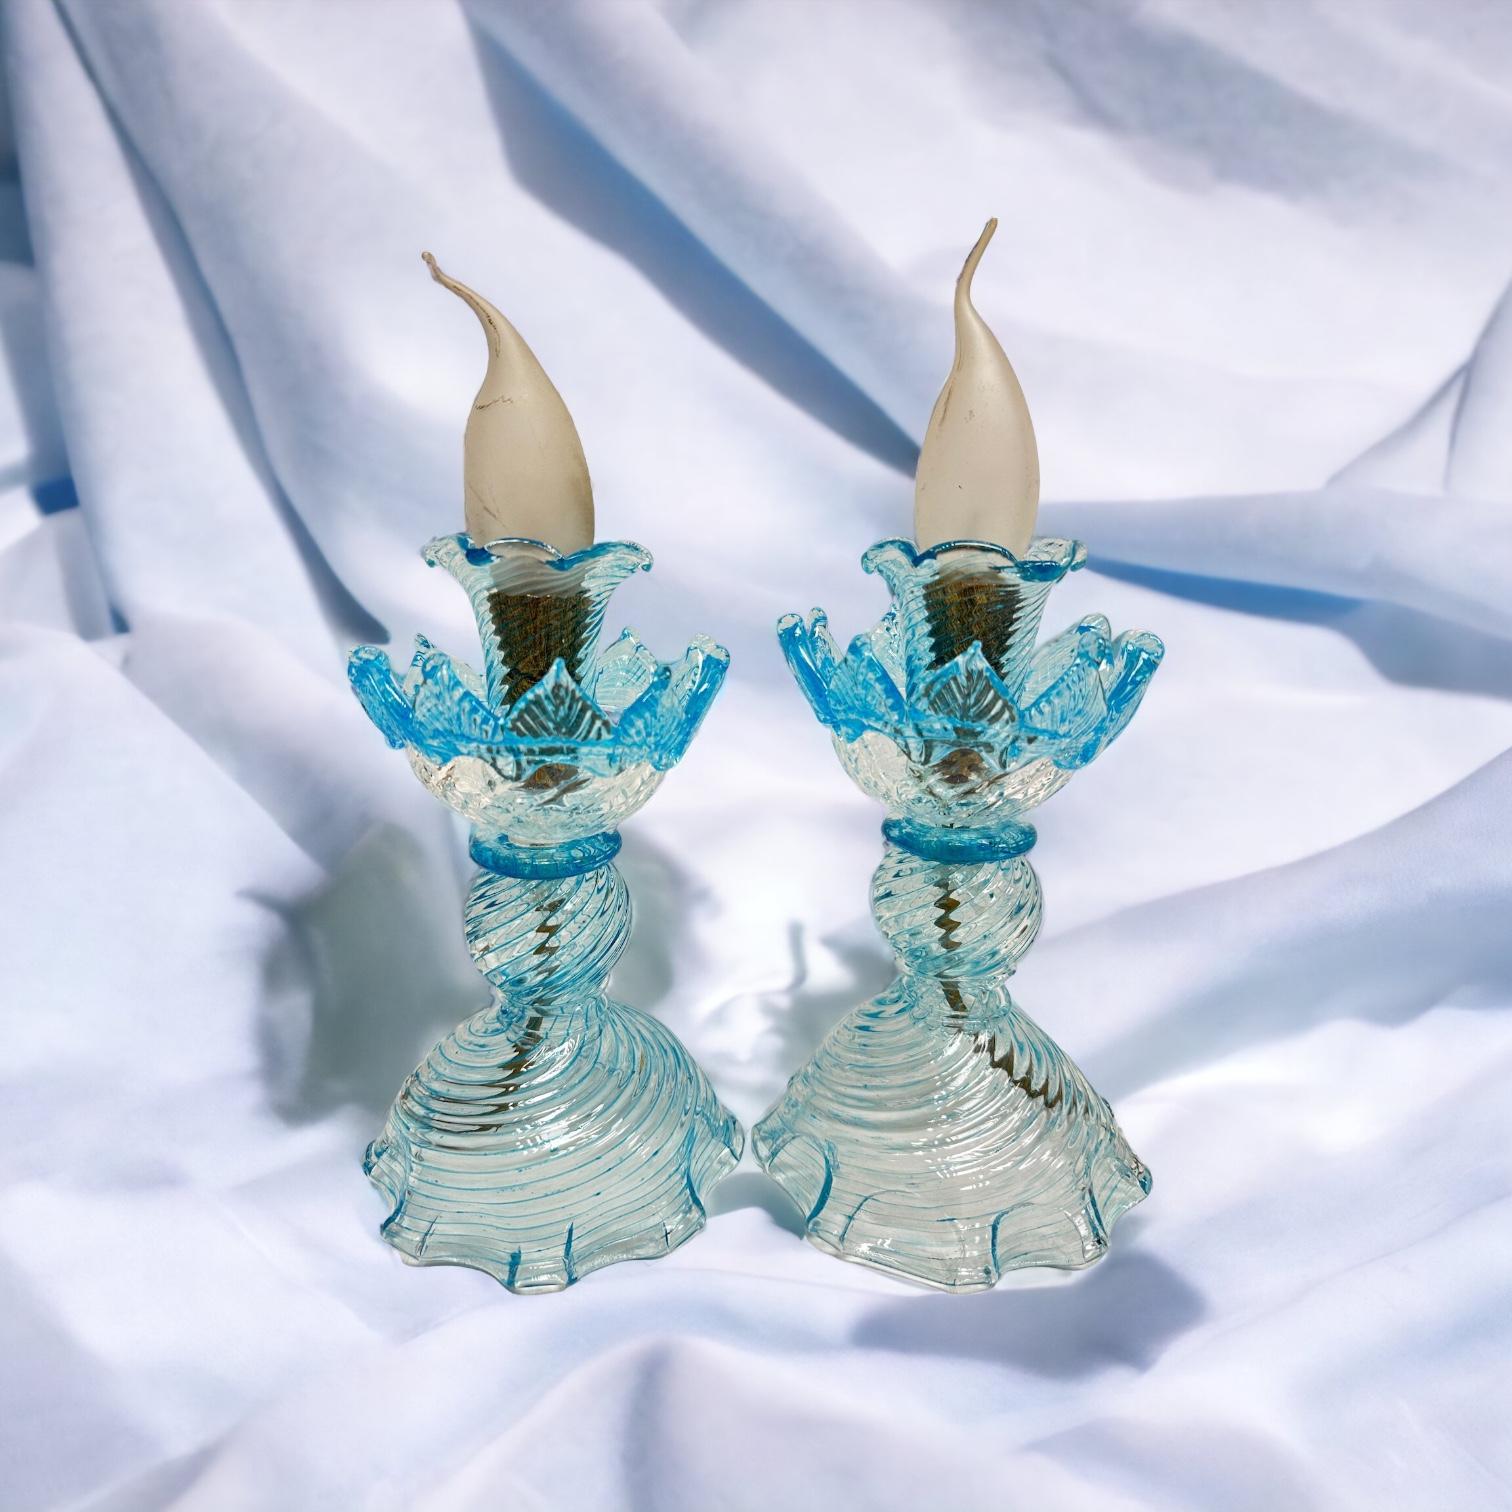 Gorgeous pair of petite table lamps or bedside table lamps. Made of clear Murano glass with light blue edges, made by a Murano glass company in Venice, Italy. Each light requires one European E14 / 110 Volt Candelabra bulb, up to 60 watts. Total